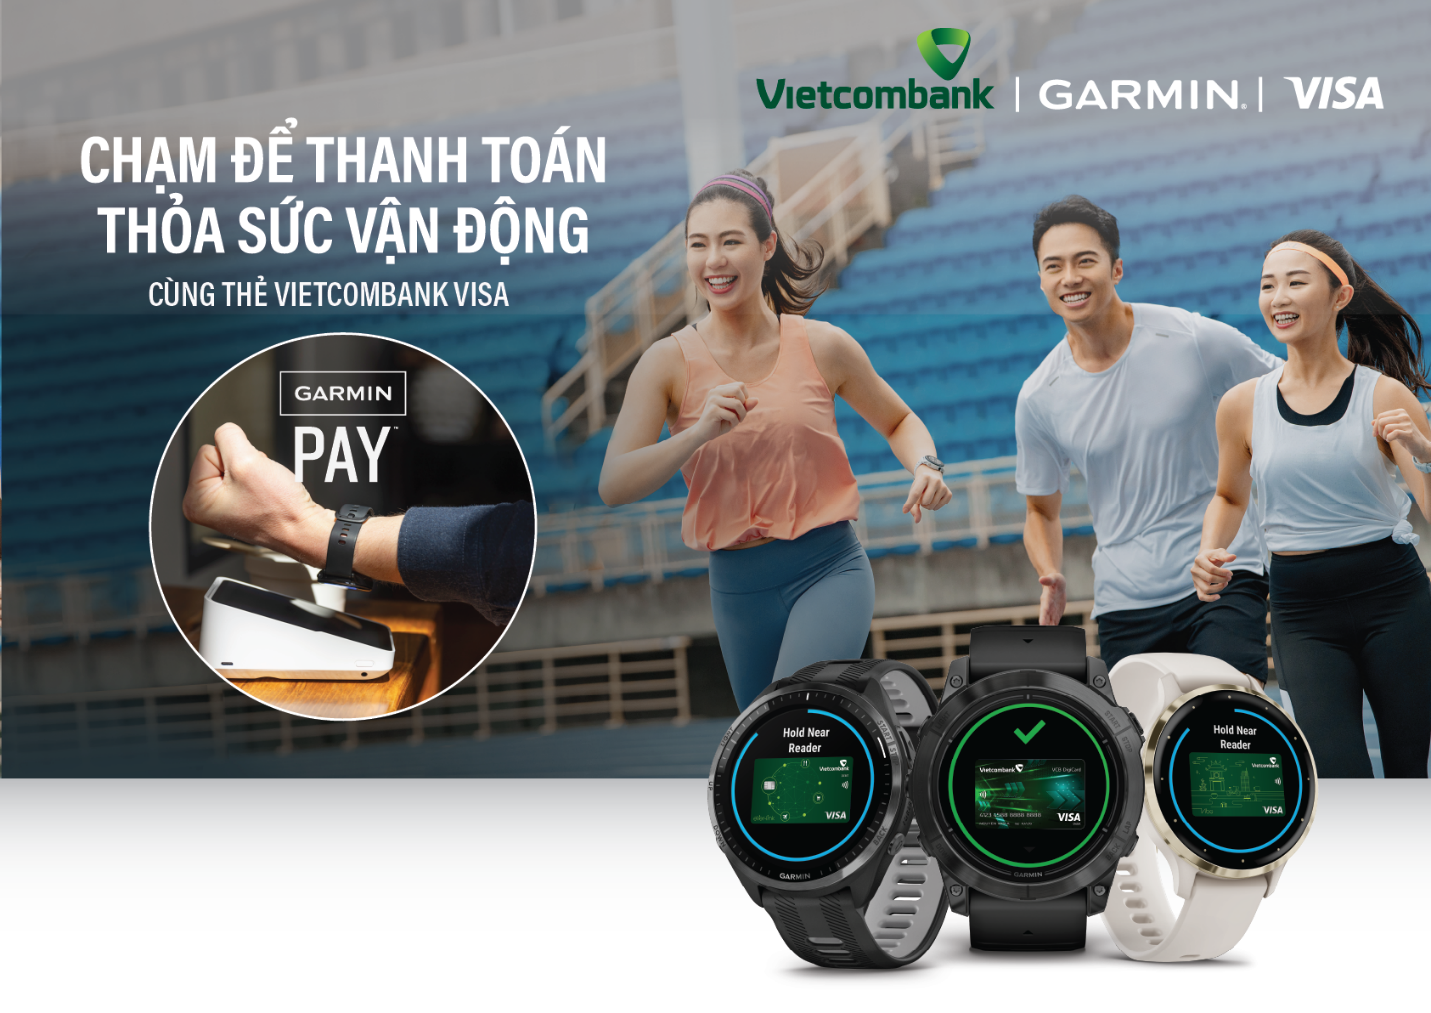 A person and person running with smart watches

Description automatically generated